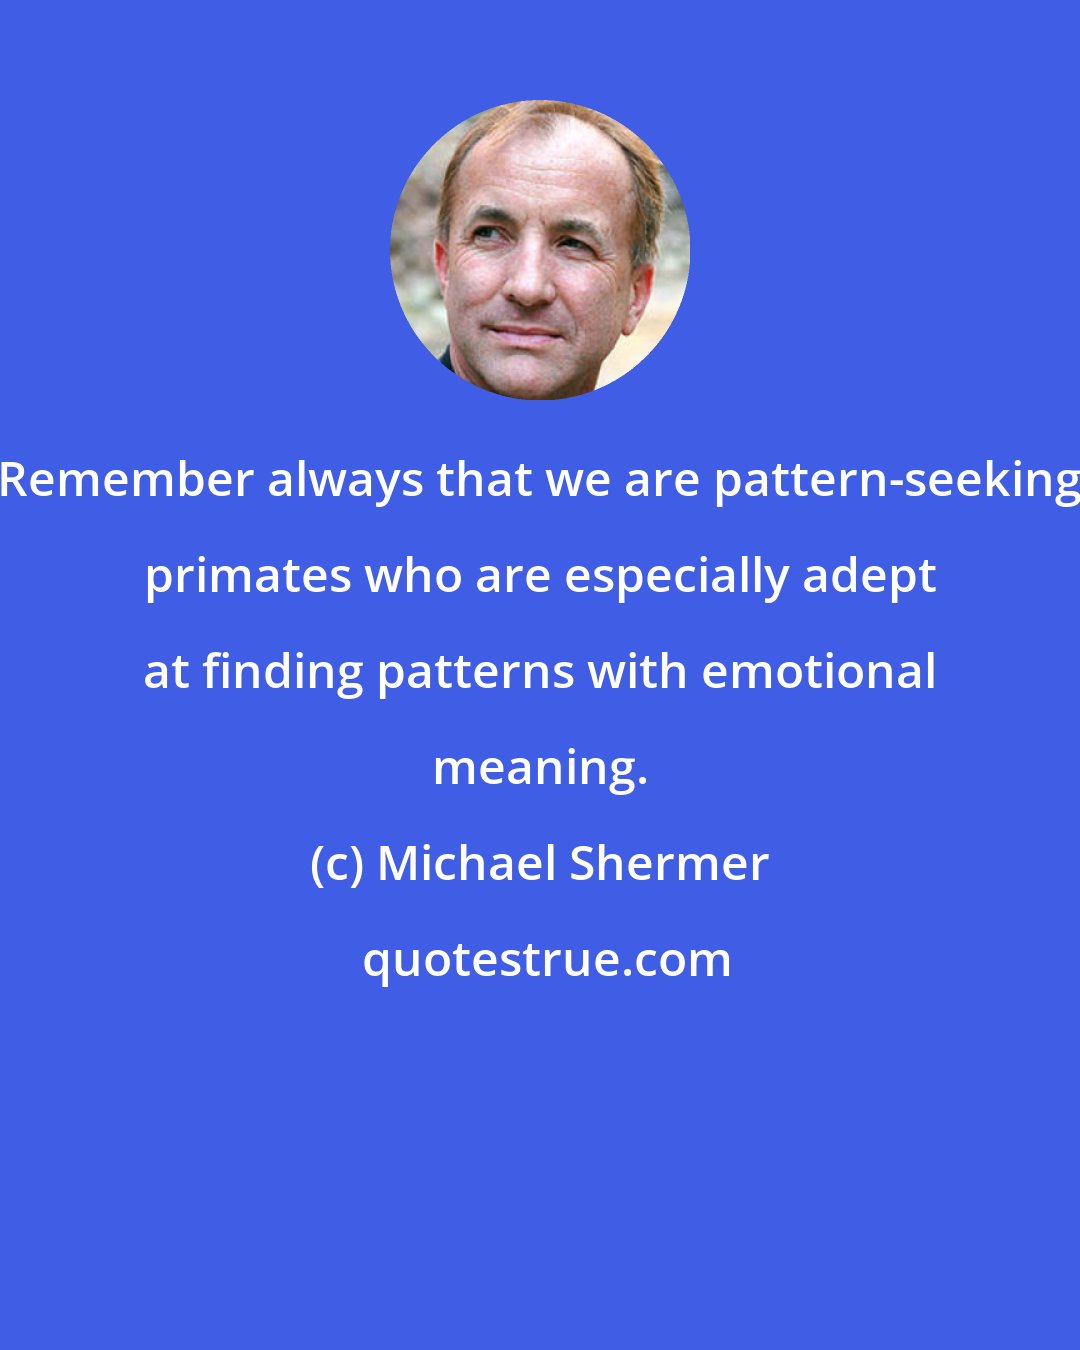 Michael Shermer: Remember always that we are pattern-seeking primates who are especially adept at finding patterns with emotional meaning.